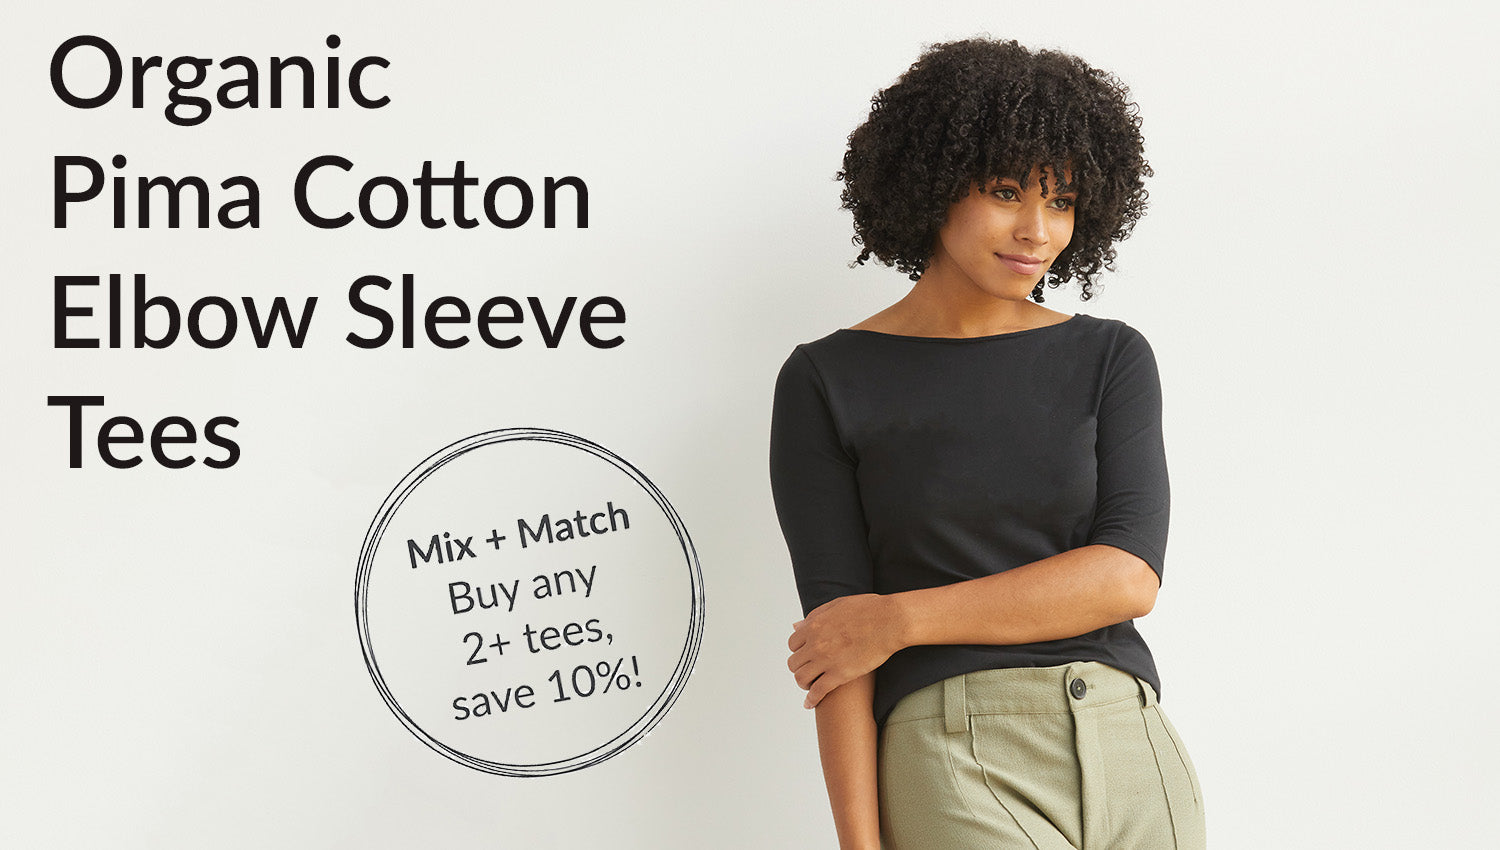 womens organic half sleeve tops and tees - ethically made - fair trade